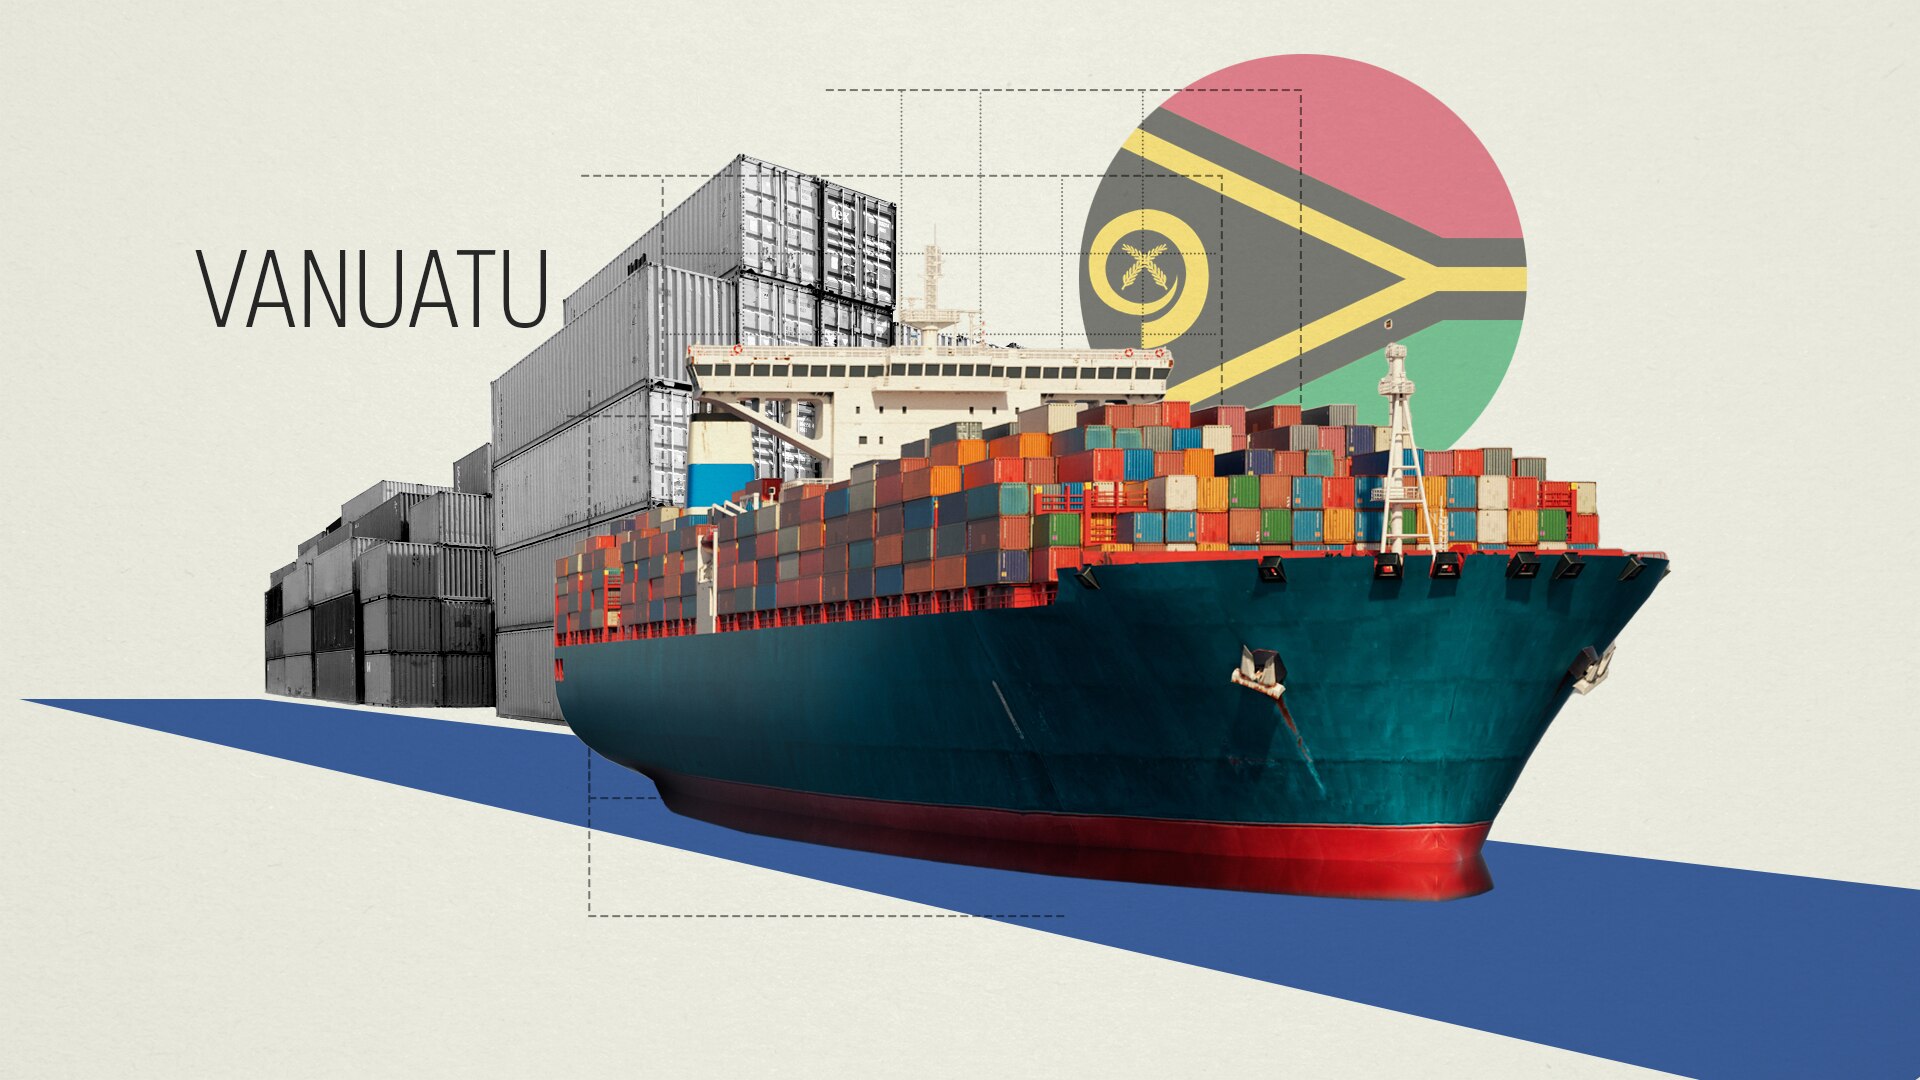 A graphic of a large ship with the Vanuatu flag in the background.